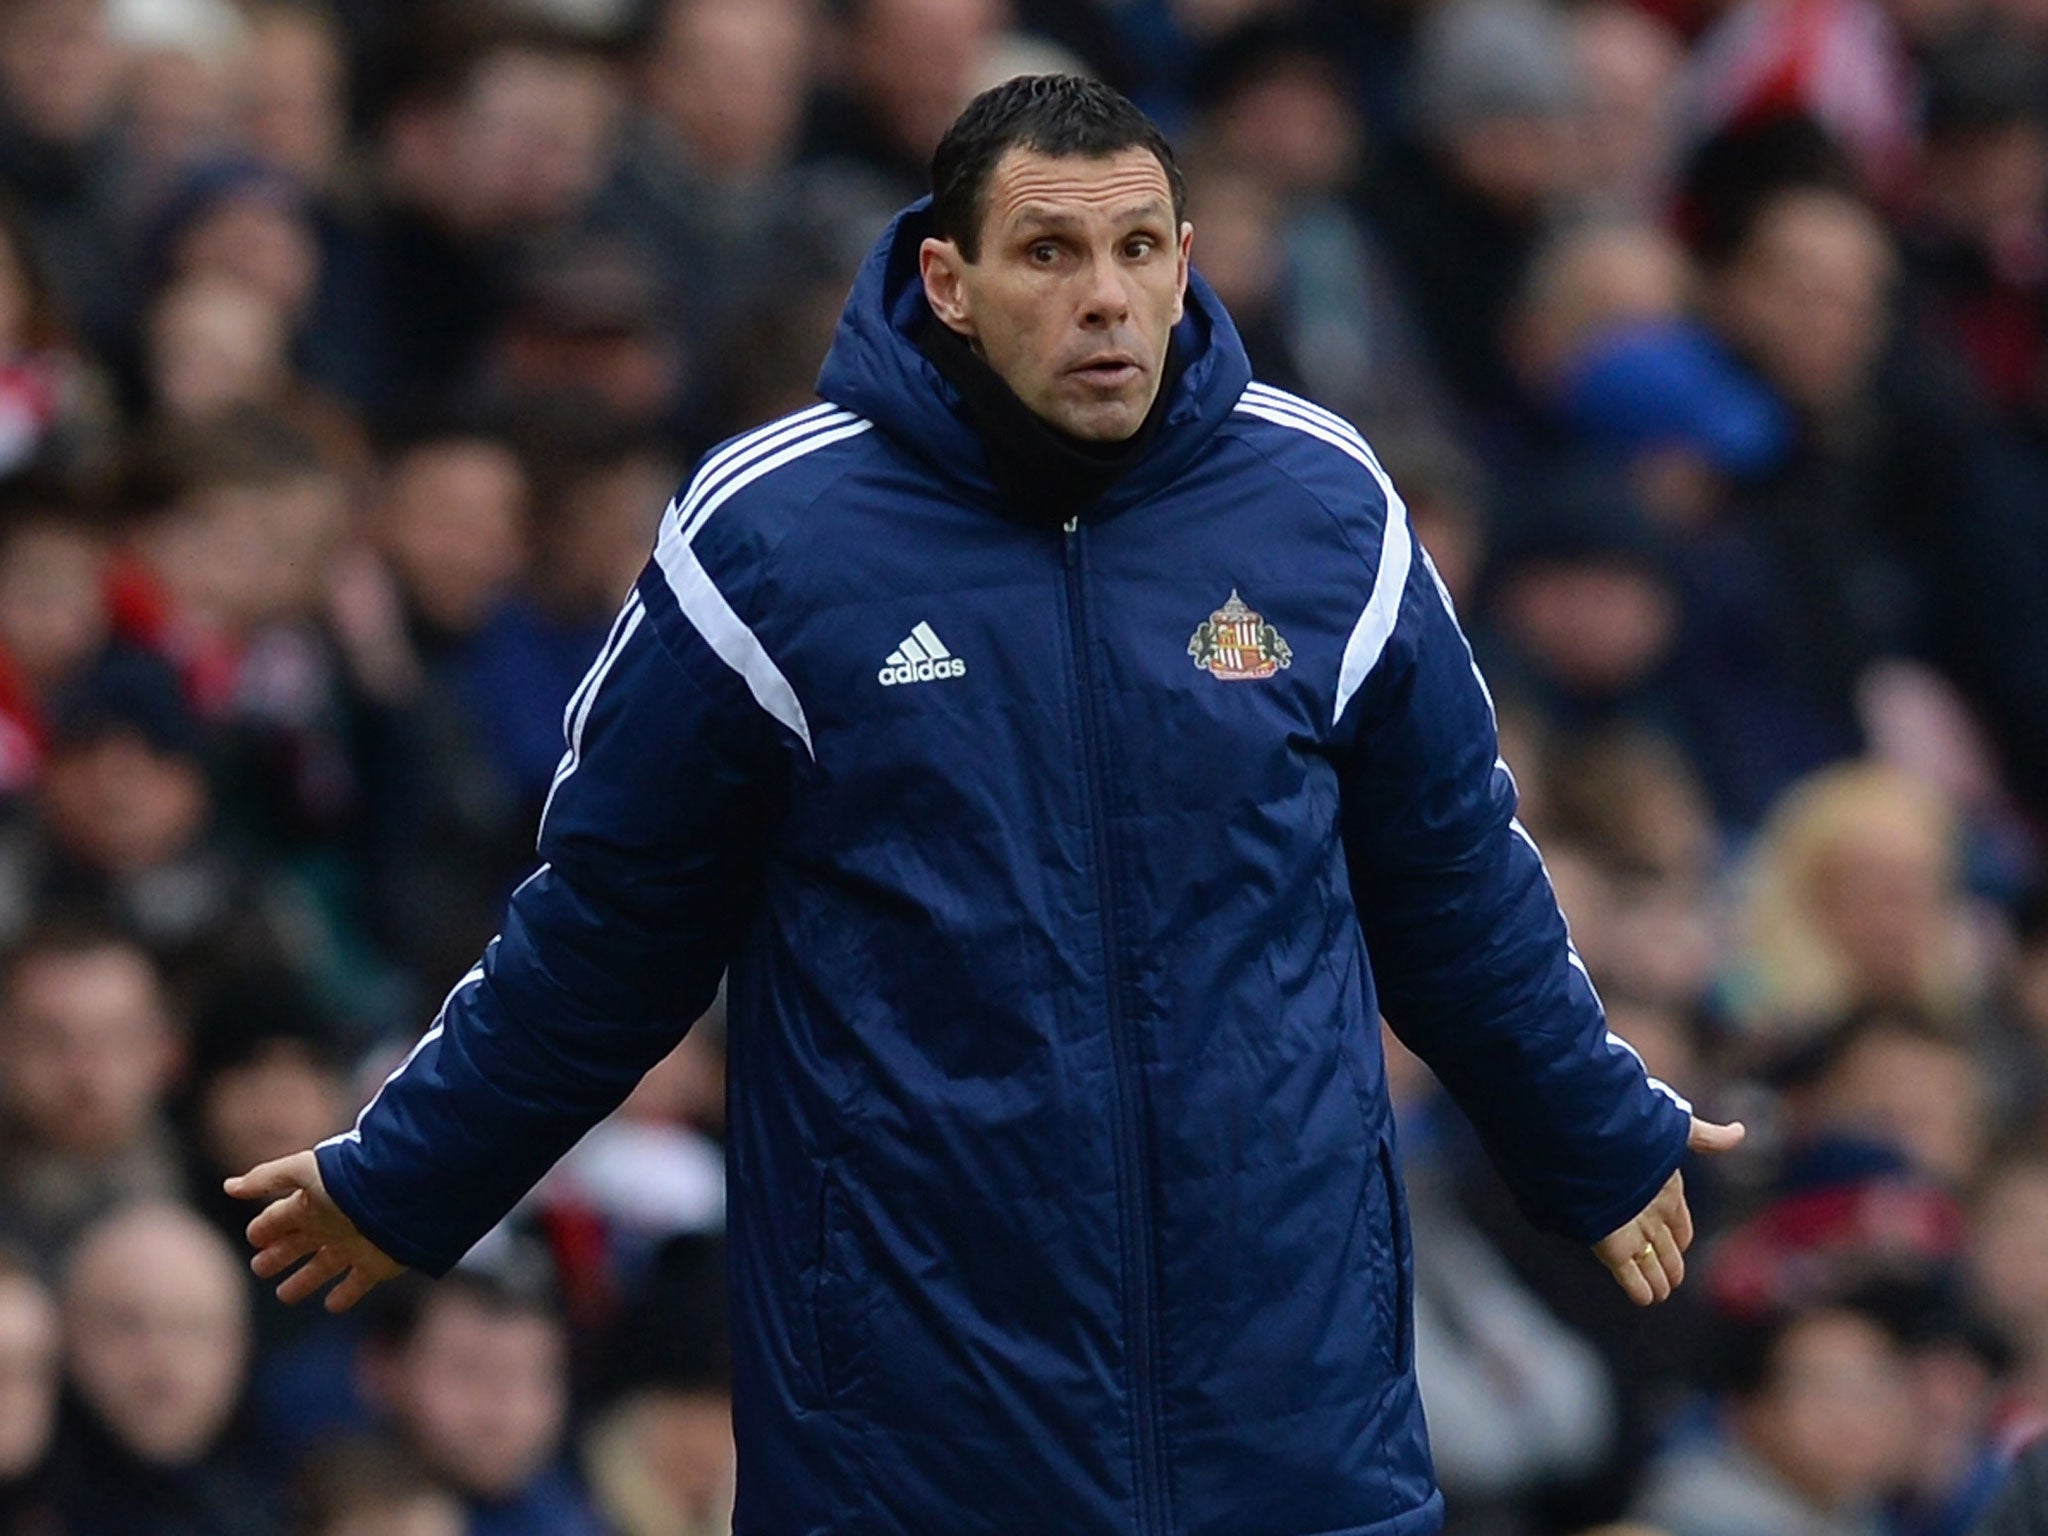 Gus Poyet could be out of a job soon